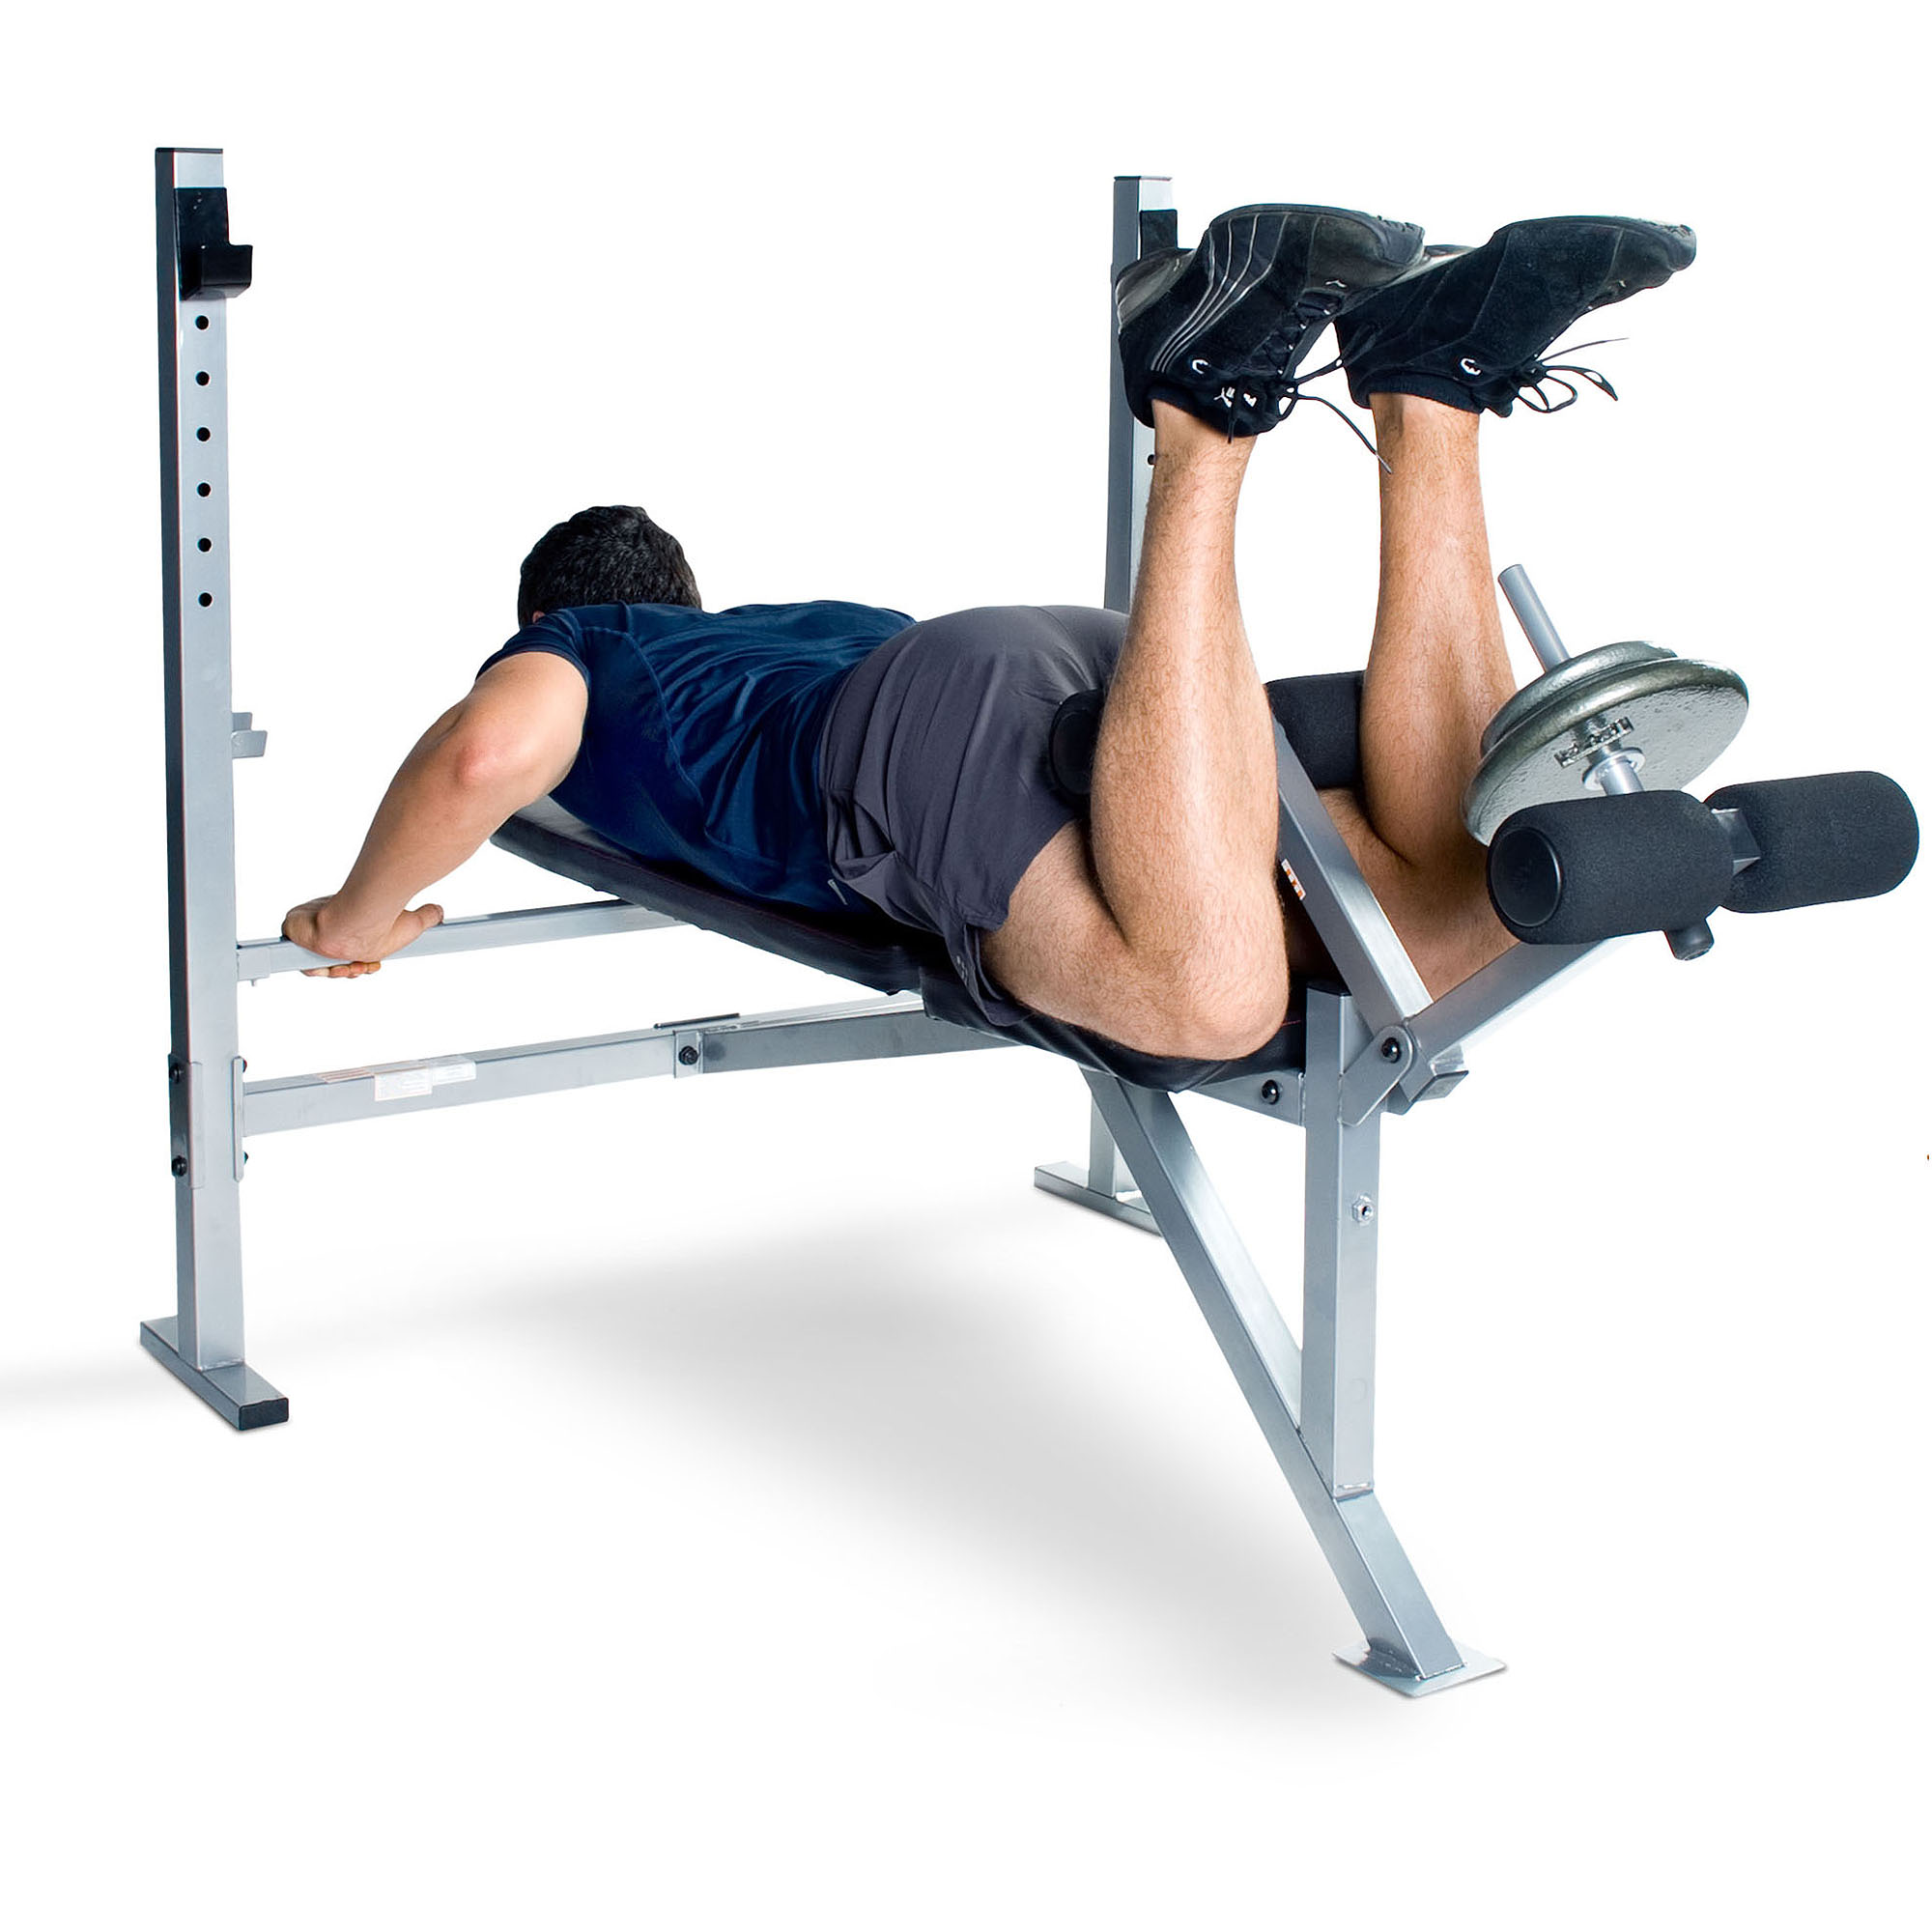 CAP Strength Deluxe Mid-Width Weight Bench with Leg Attachment (500lb Capacity), Black and Gray - image 5 of 5